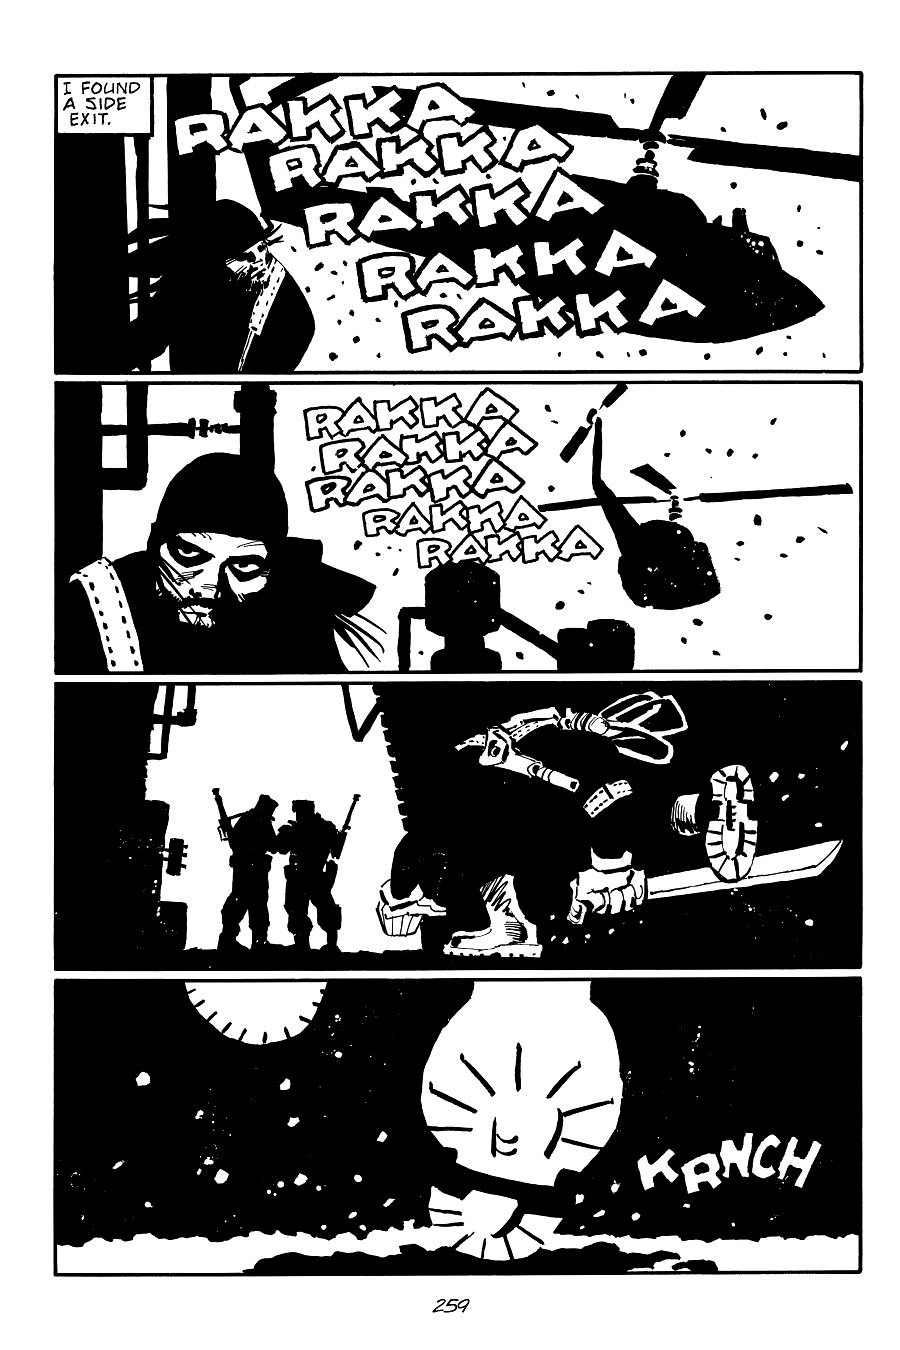 page 259 of sin city 7 hell and back